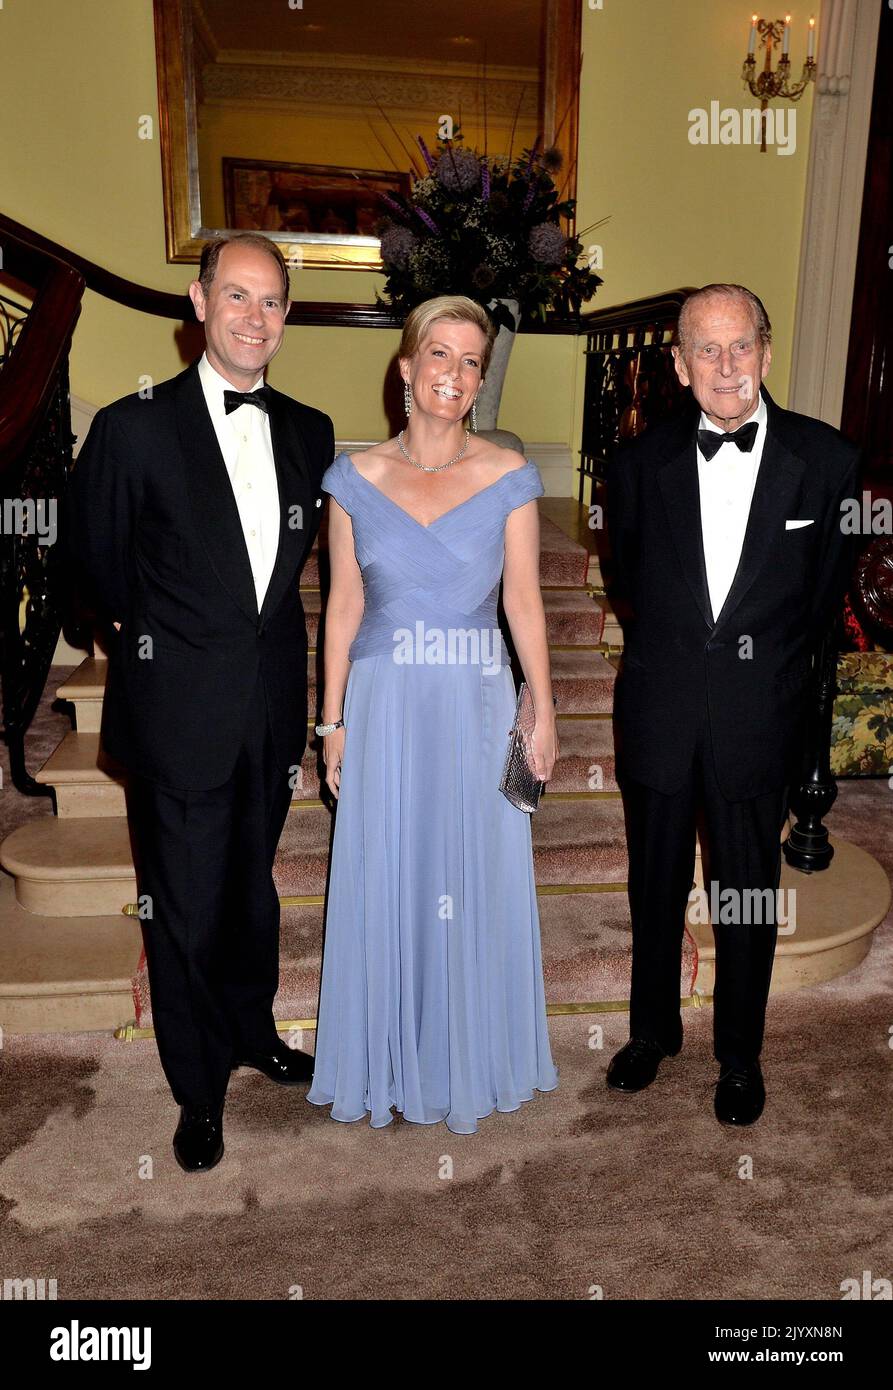 File photo dated 9/6/2016 of the Duke of Edinburgh (right) with the Earl and Countess of Wessex, attending a Gala Evening marking the 60th anniversary of The Duke of Edinburgh's Award, at Stoke Park, Stoke Poges, Buckinghamshire. Issue date: Thursday September 8, 2022. Stock Photo